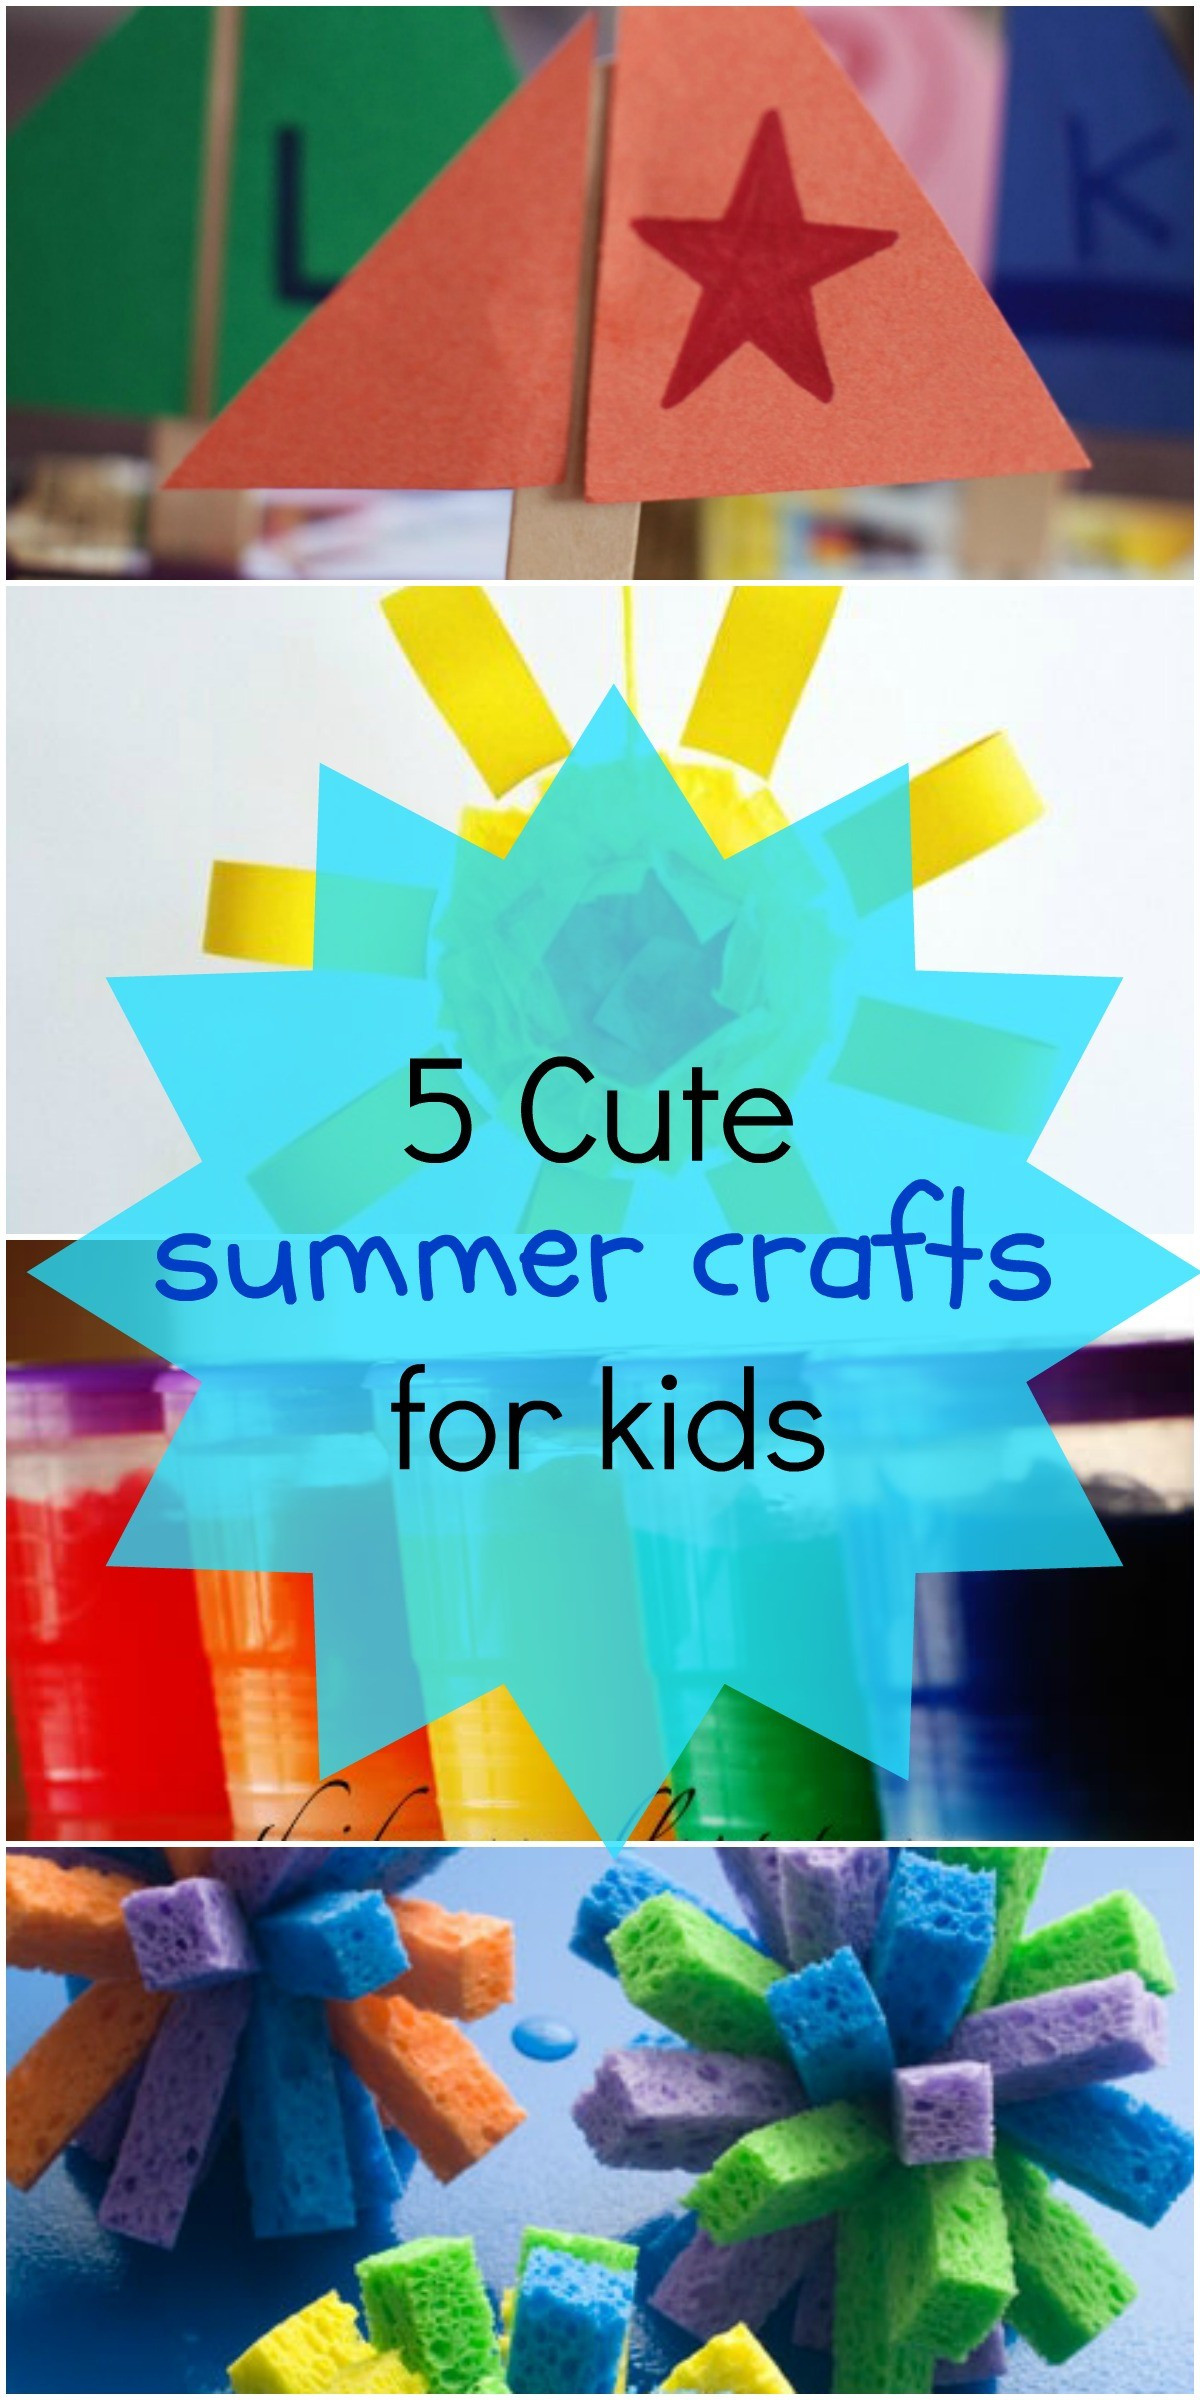 Preschool Arts And Crafts For Summer
 5 Fun Summer Crafts for Kids Love These Art Project Ideas